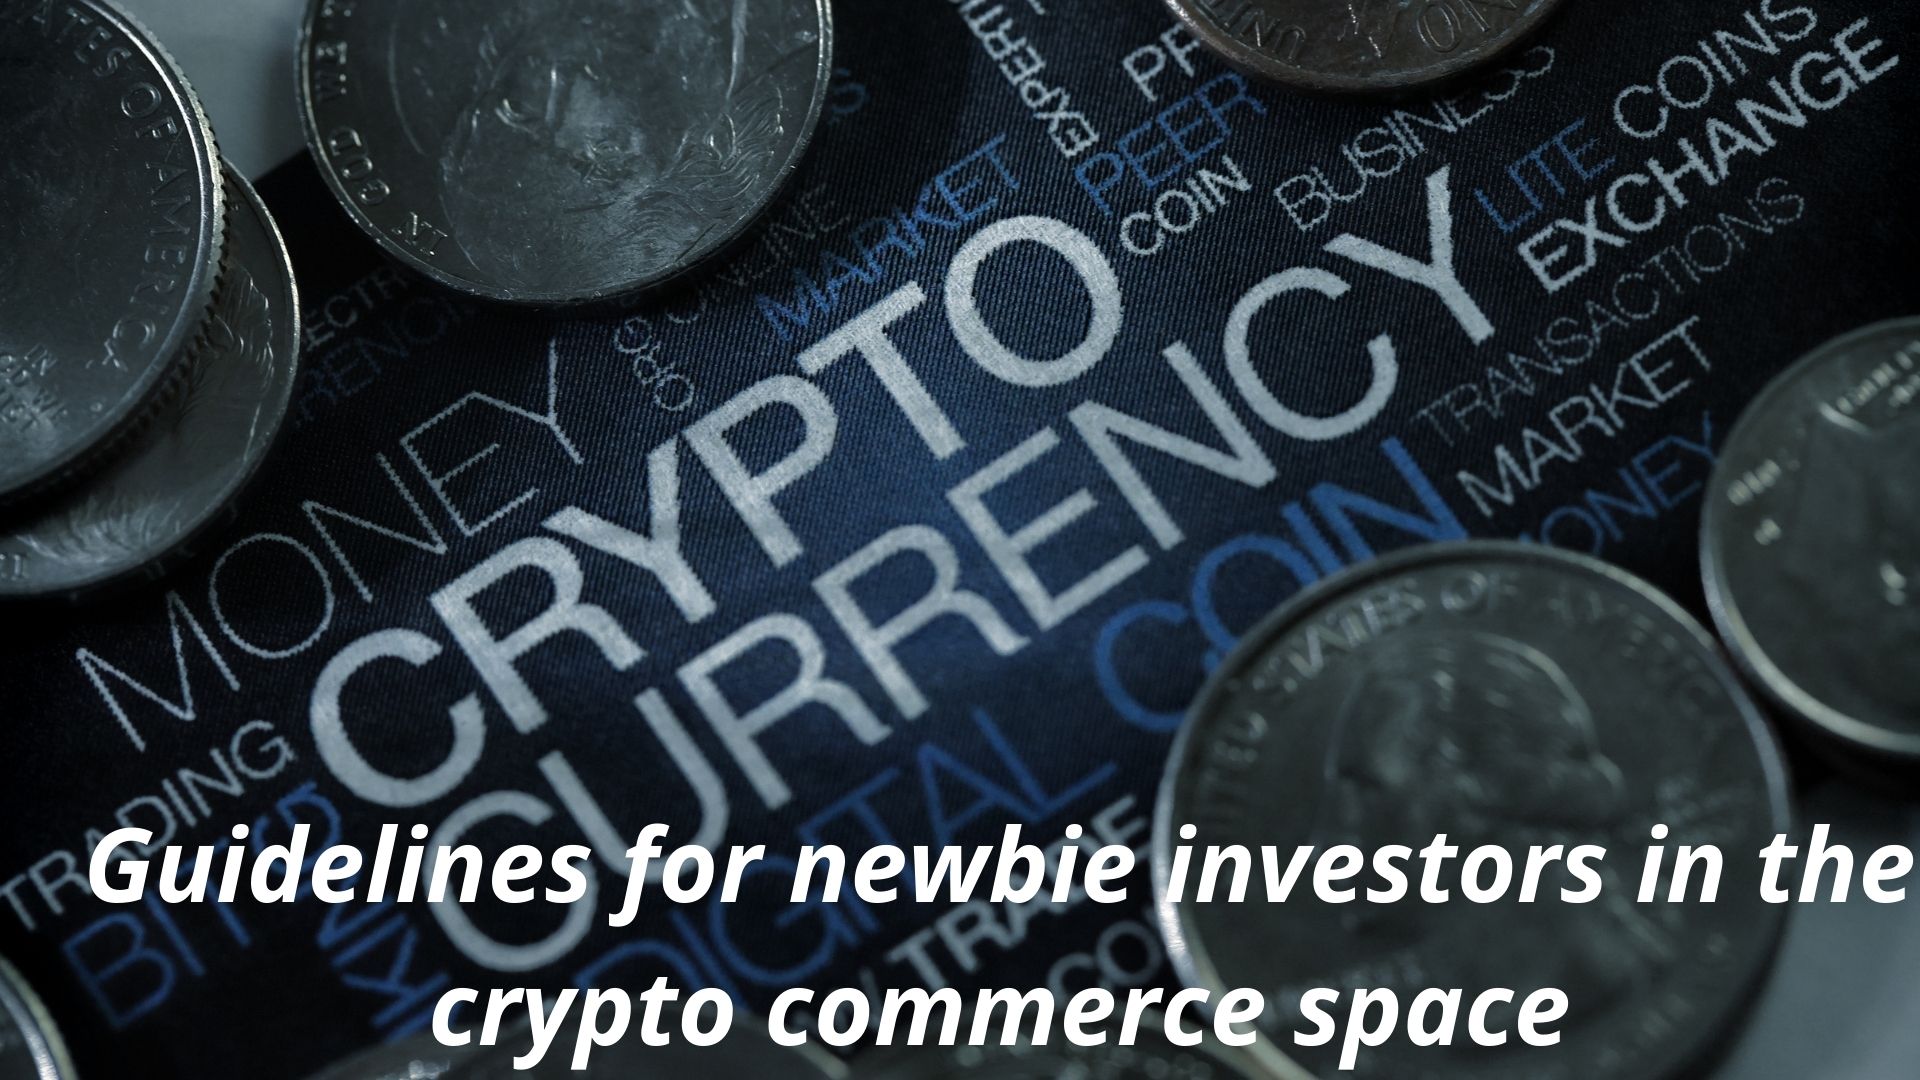 Guidelines for newbie investors in the crypto commerce space